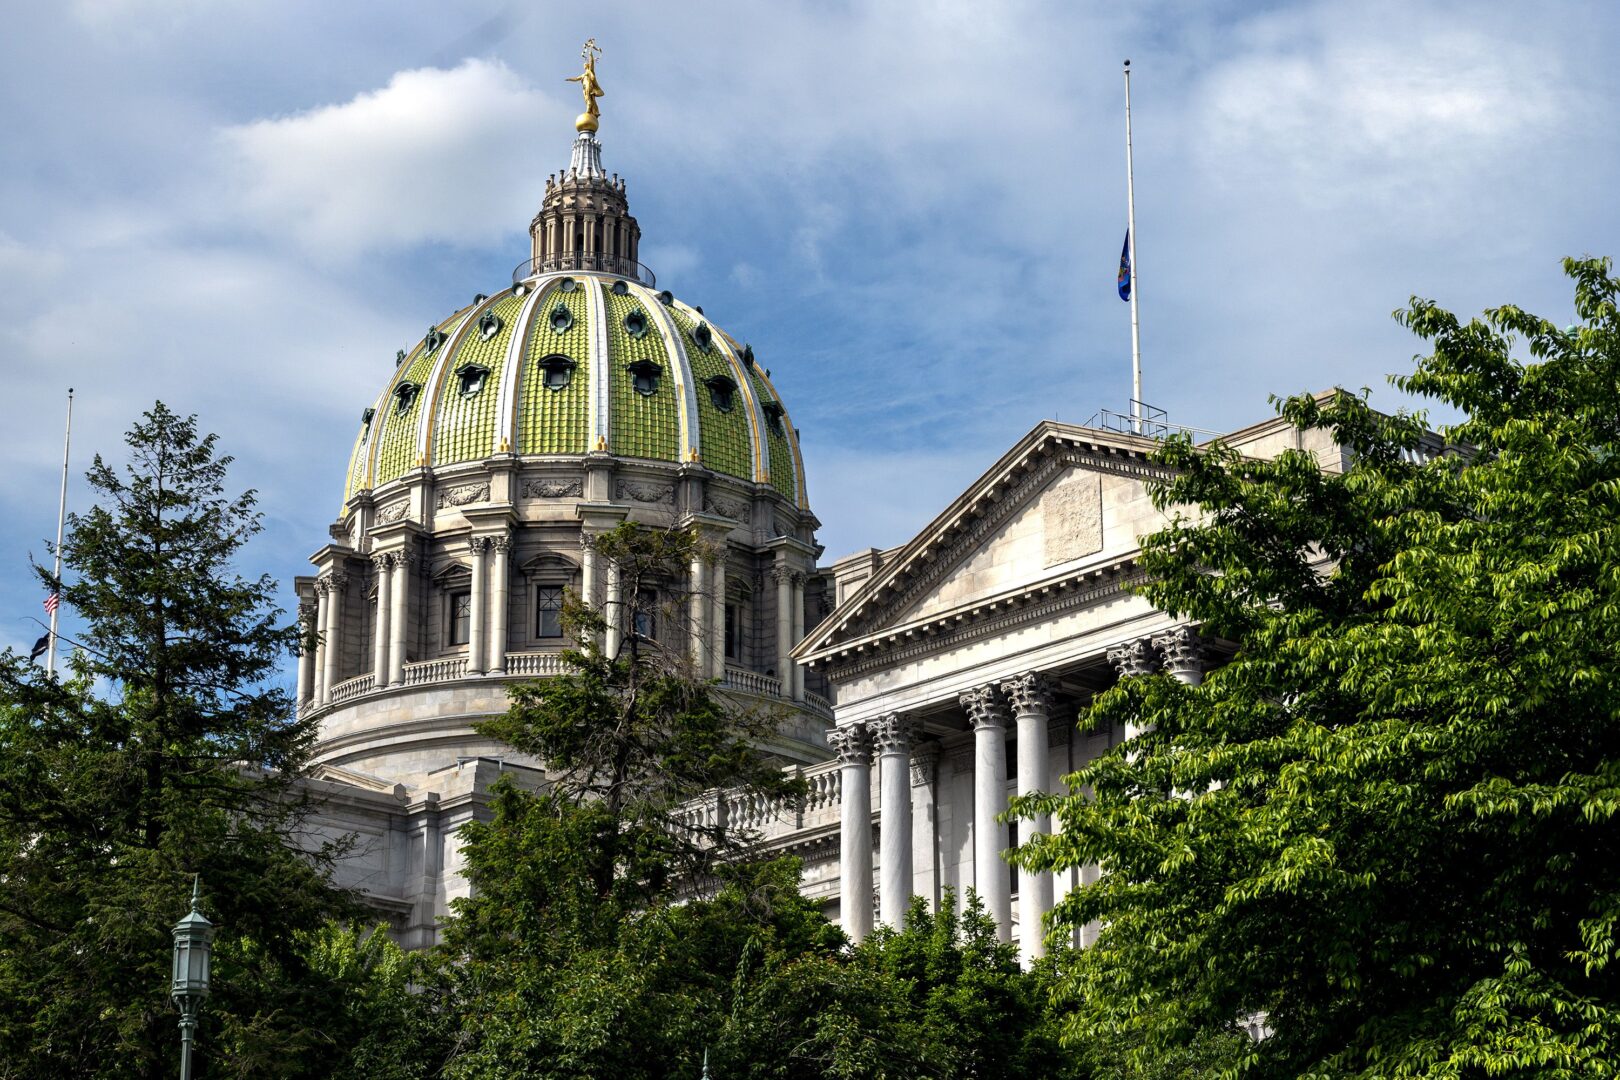 A Pennsylvania lobbyist said she was harassed by a current lawmaker outside of the Capitol building Harrisburg.